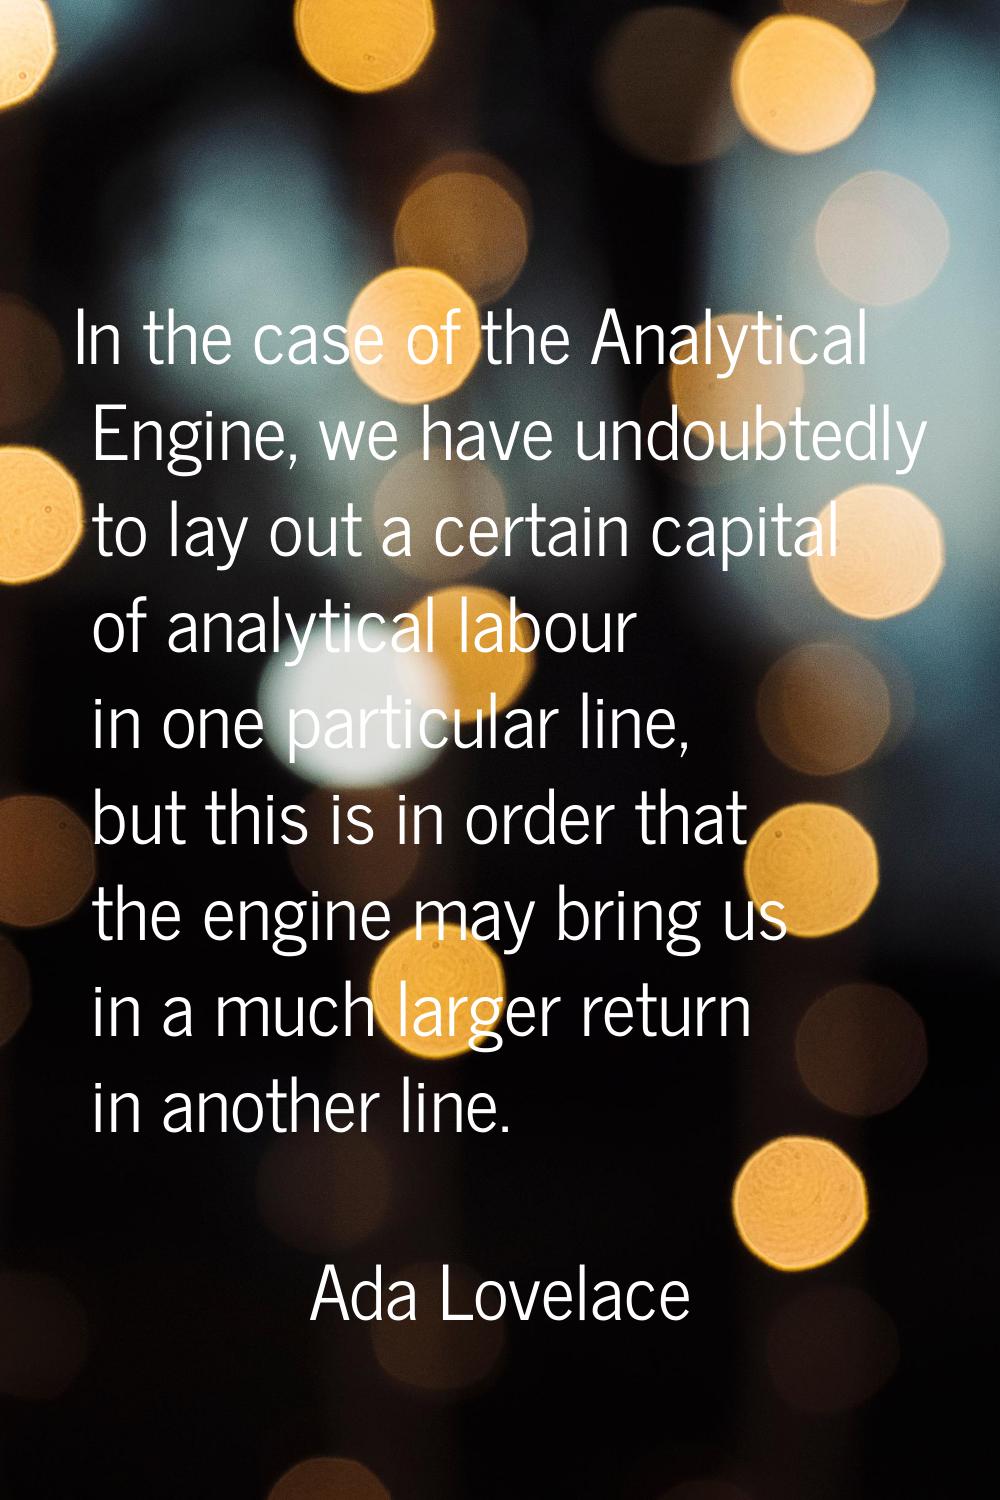 In the case of the Analytical Engine, we have undoubtedly to lay out a certain capital of analytica